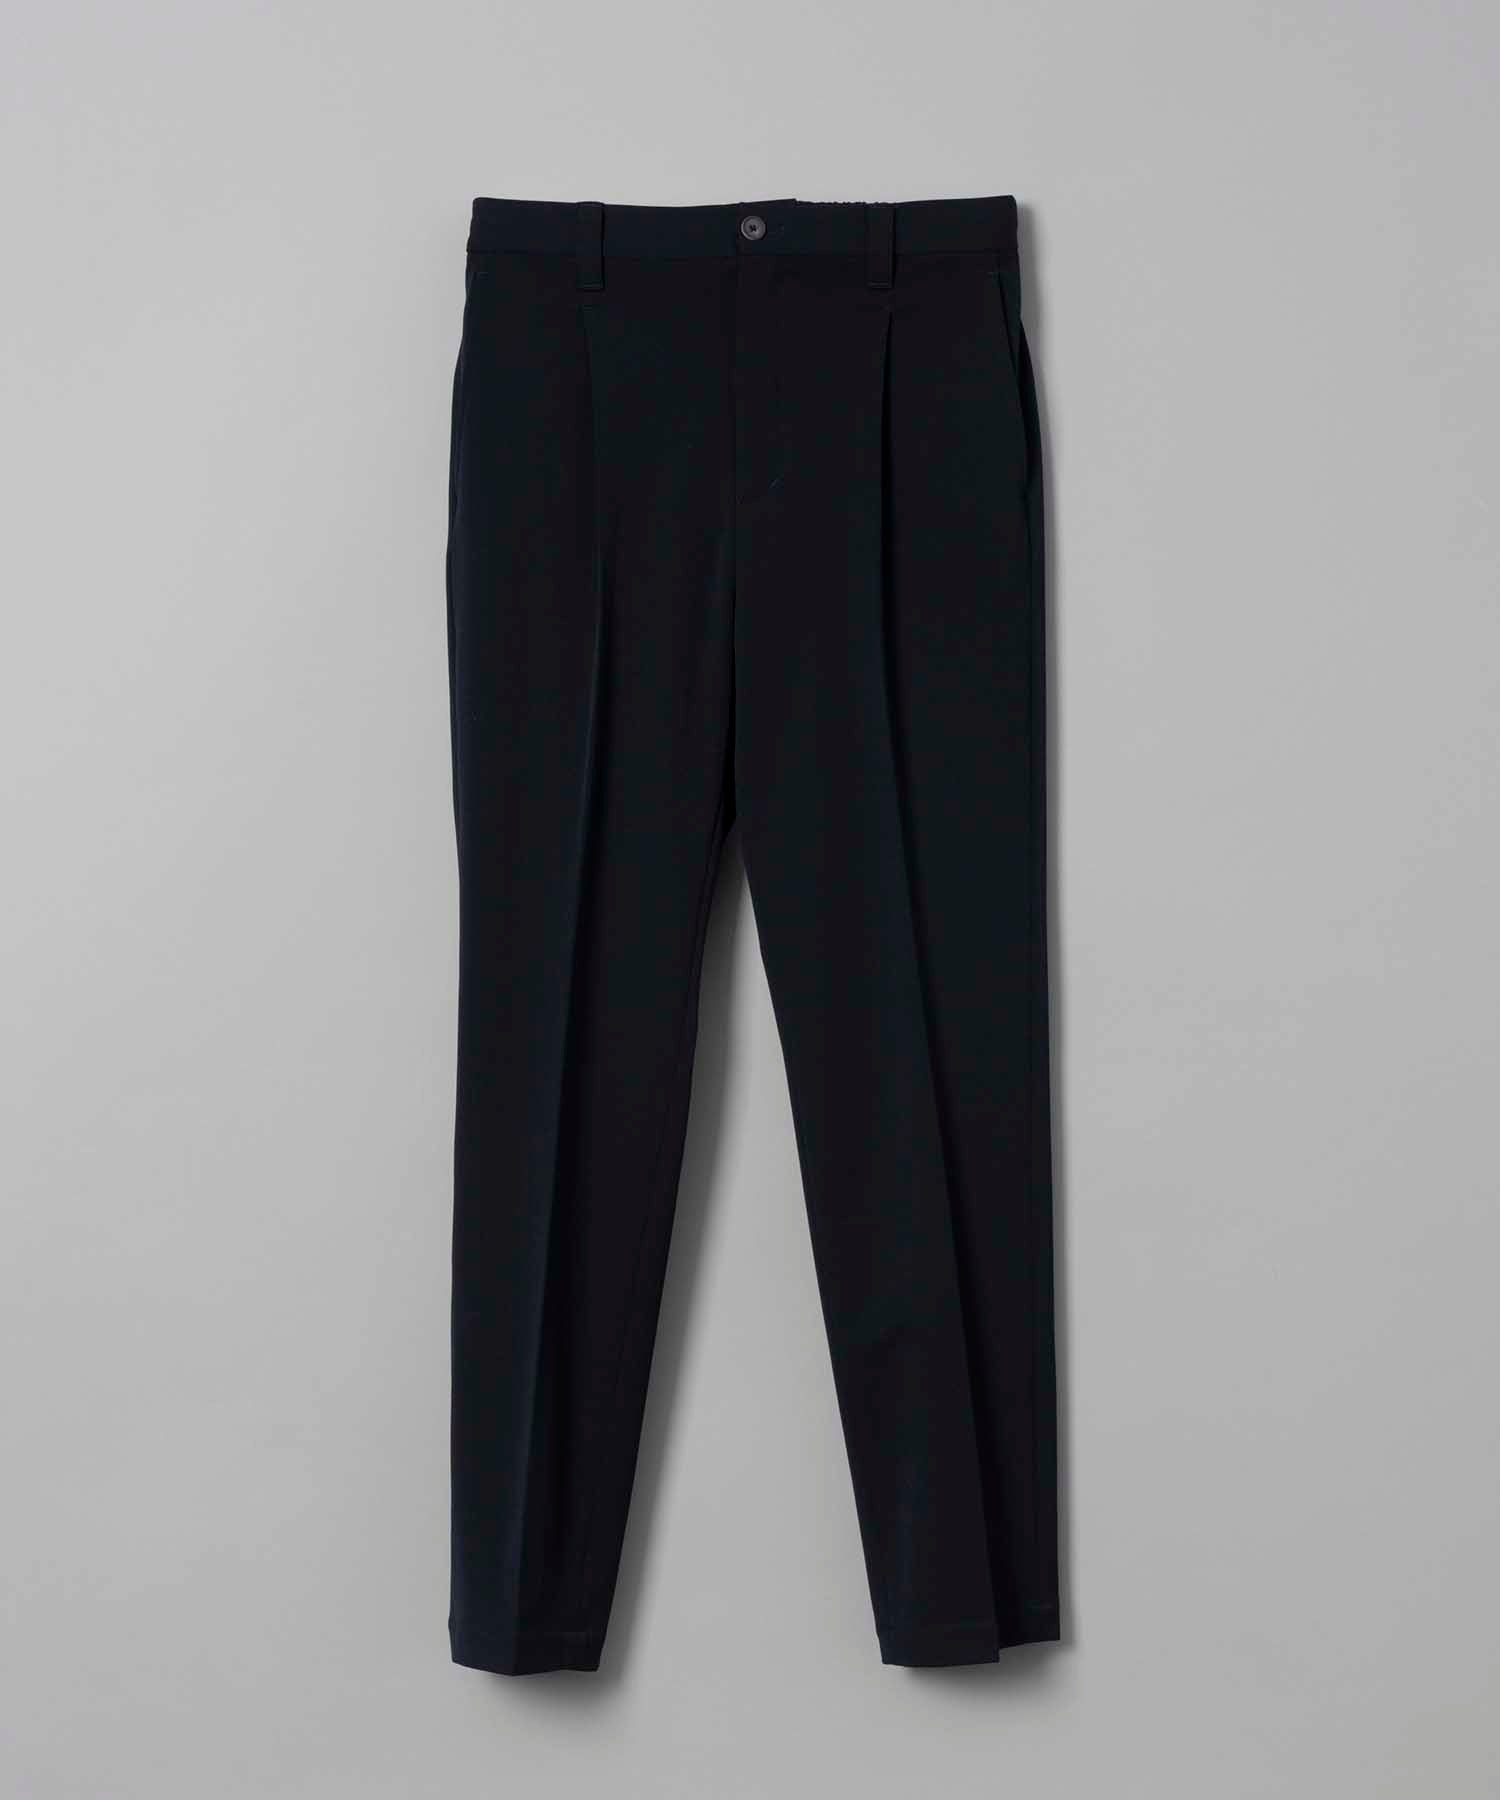 OUTLAST One-Tuck Tapered Pants